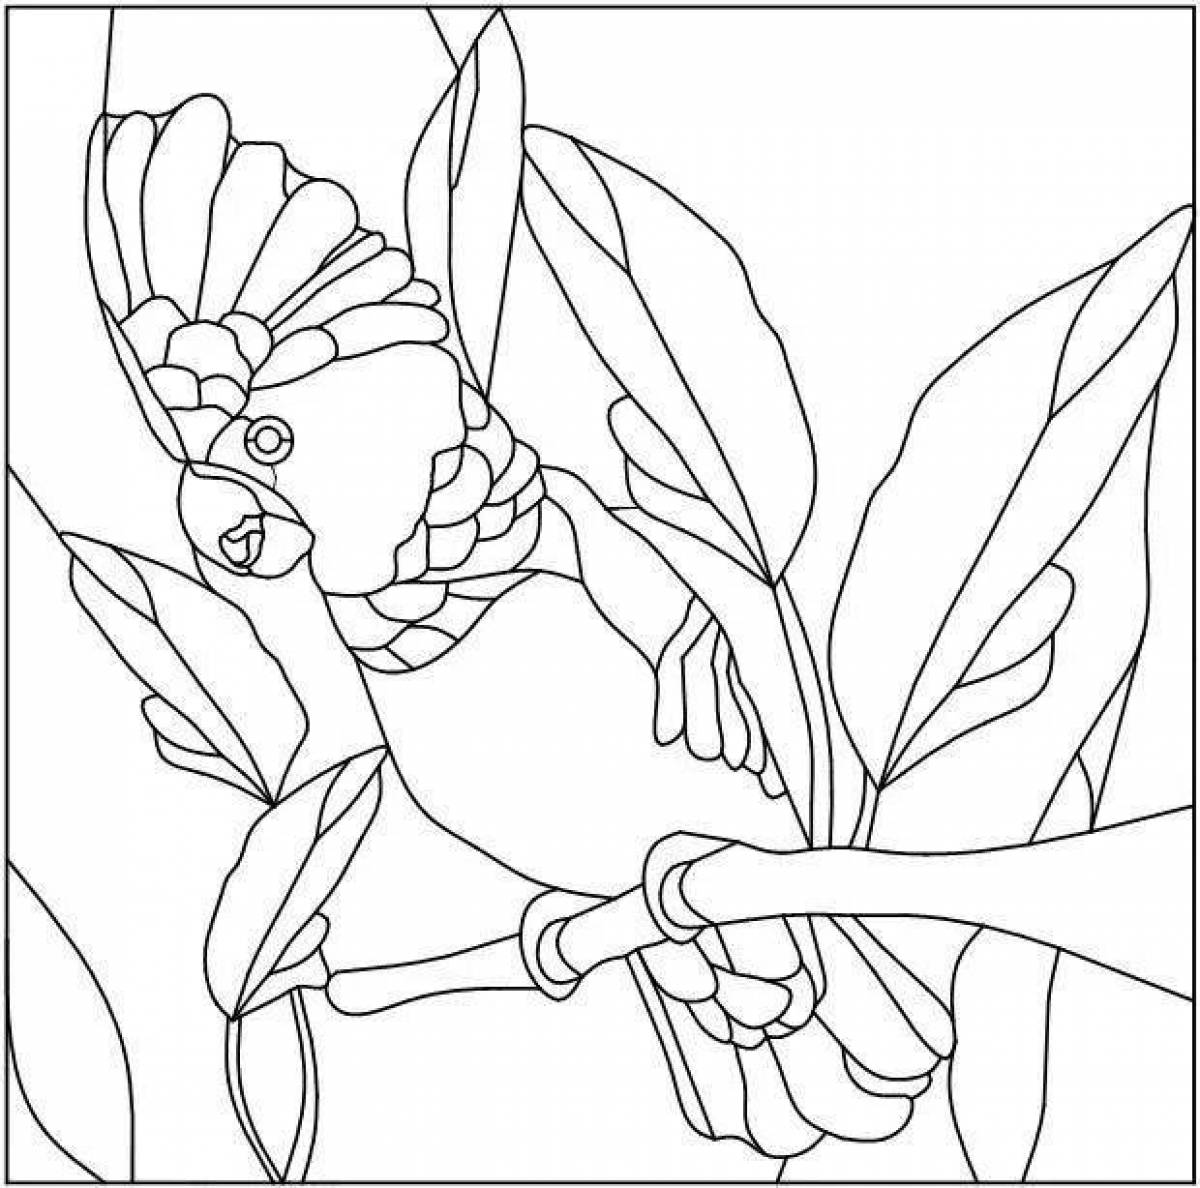 Merry stained glass coloring book